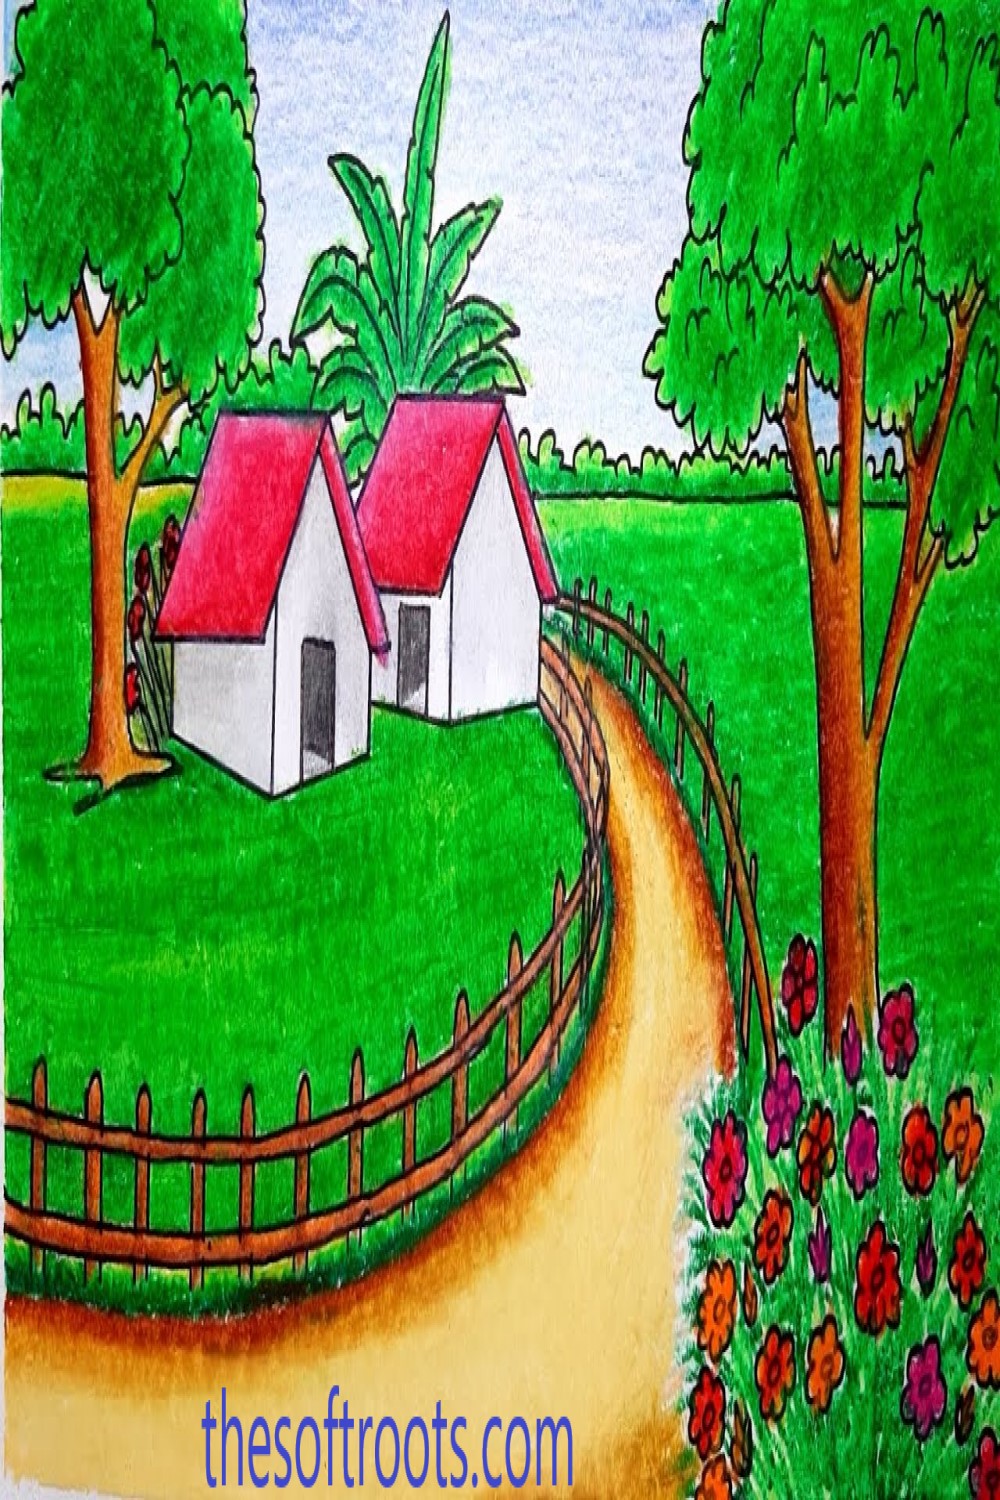 Landscape Scenery Painting And Drawing, Landscape Drawing Ideas